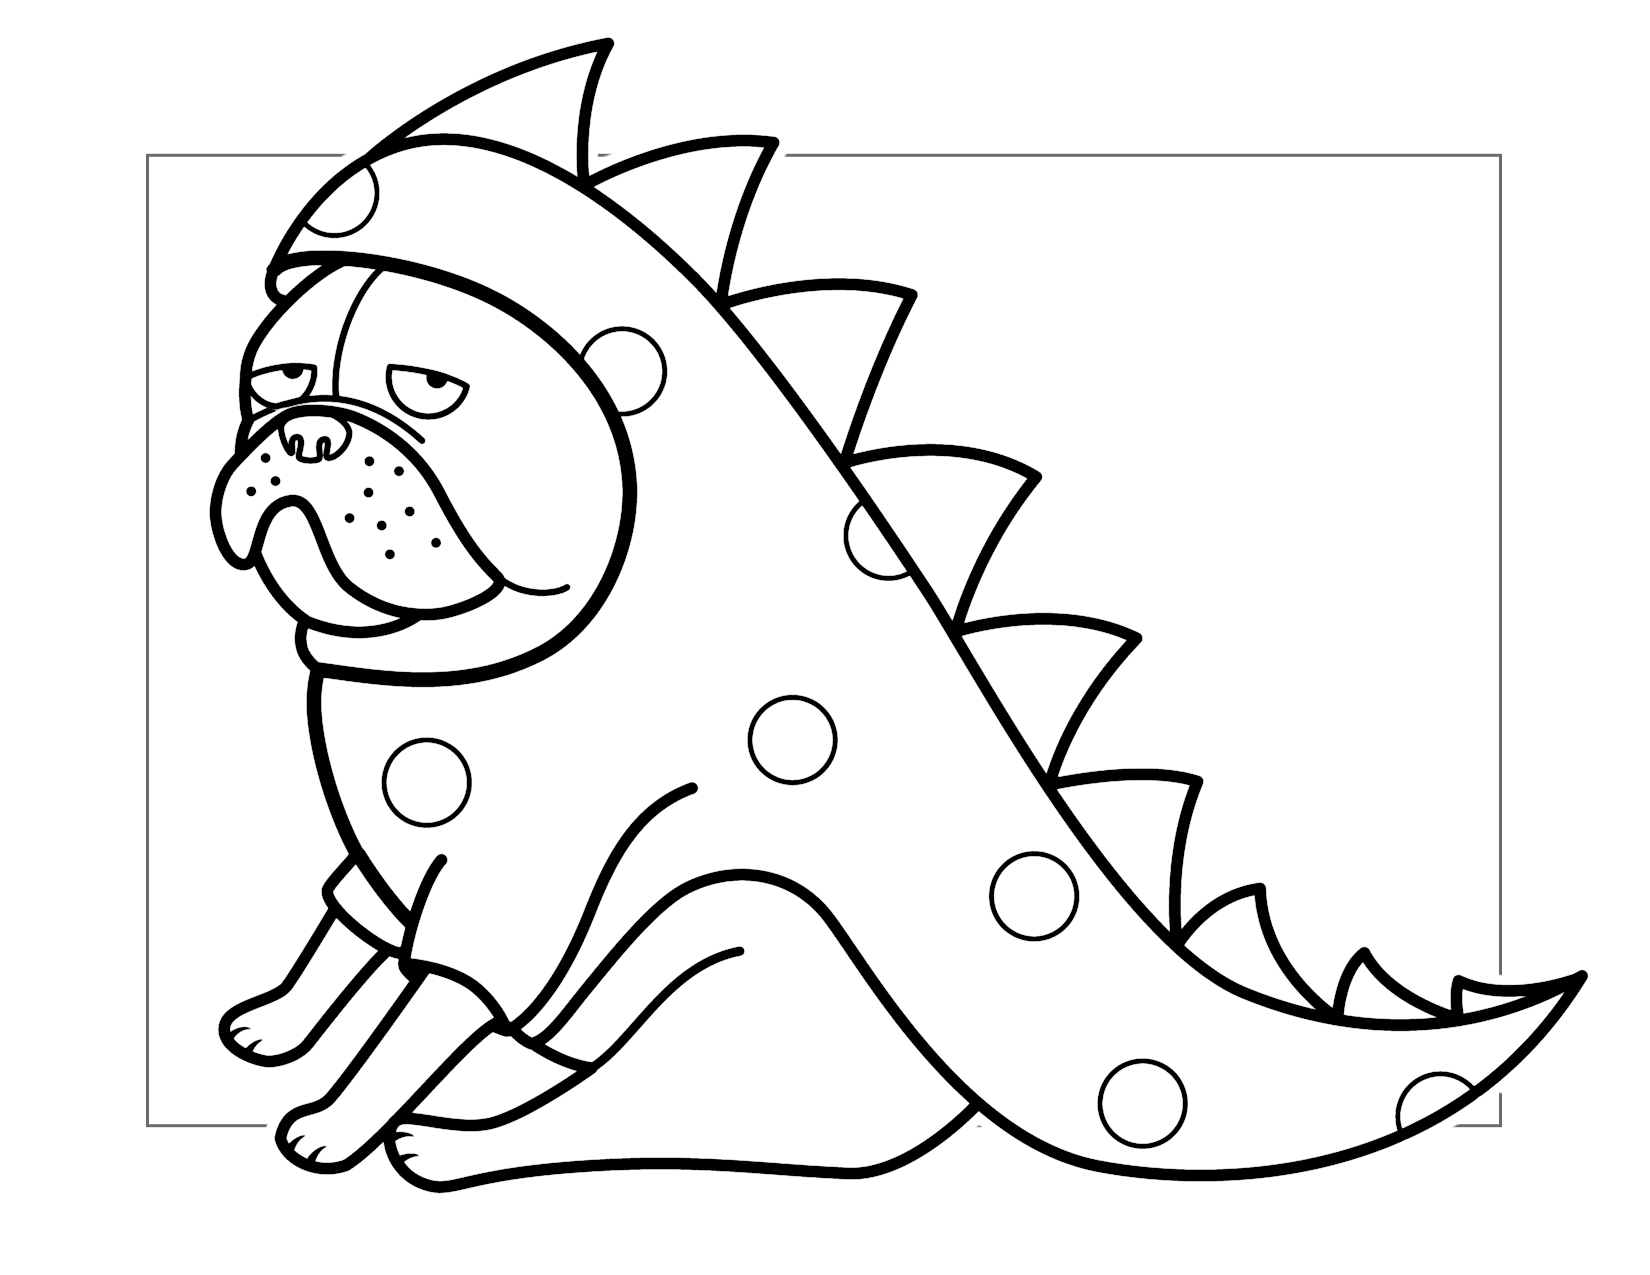 Dog In A Dragon Costume Coloring Page